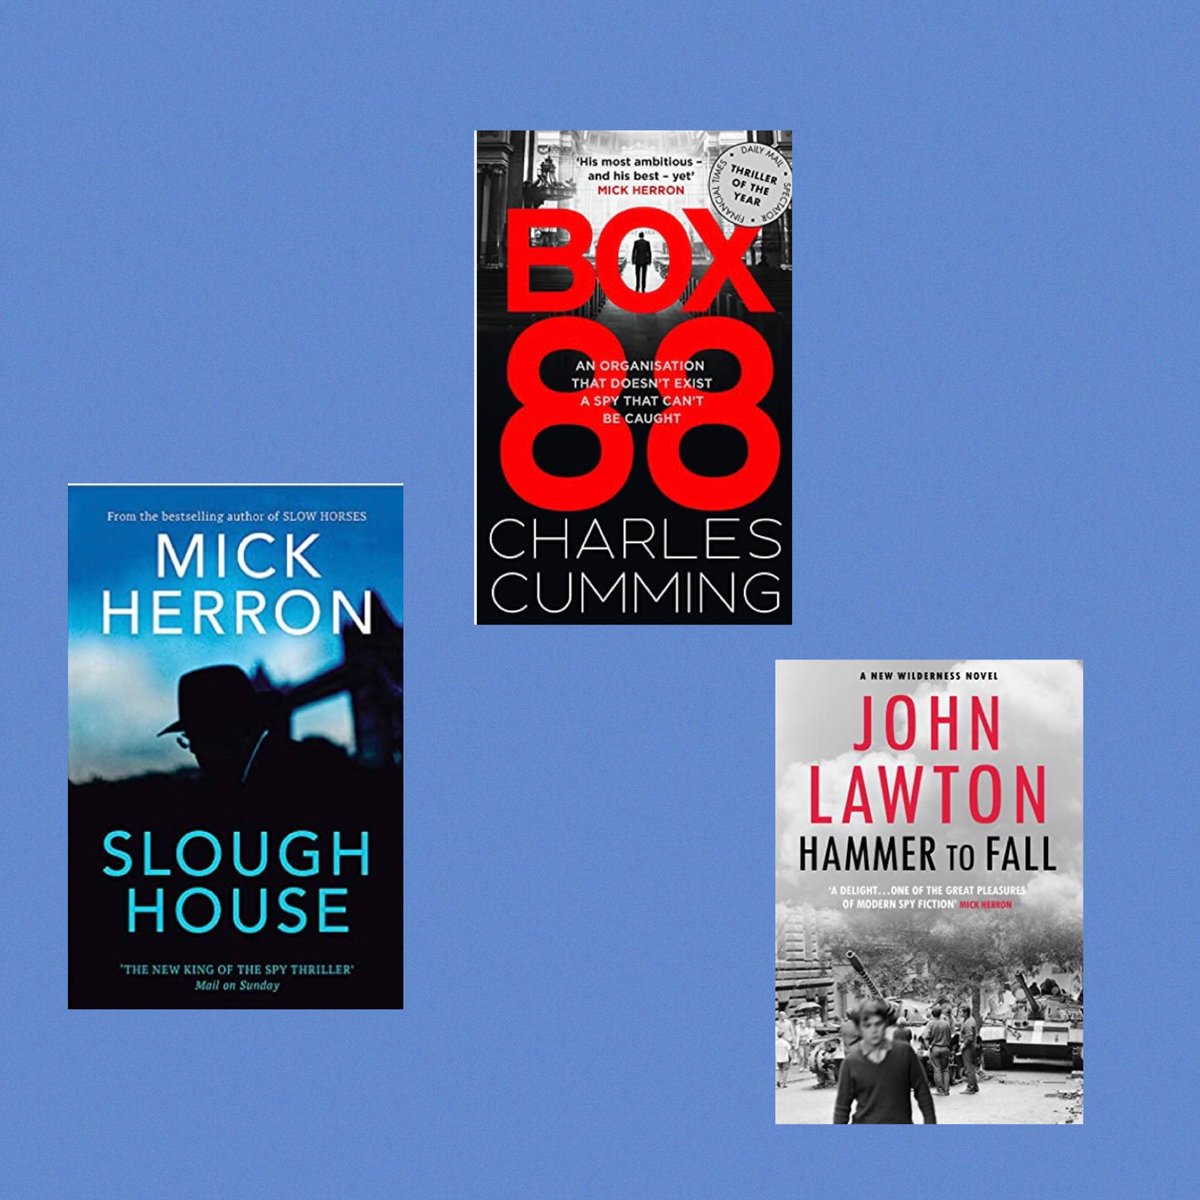 For #FollowFriday 60 a rerun of one of my very 1st FF posts. 3 great spy thrillers: ⁦@CharlesCumming⁩ #MickHerron and #JohnLawton. Proud to be joining John at ⁦@TheMysterious⁩ in New York on May 2 for the US launch of our latest books: #MoscowExile and #DeadInTheWater